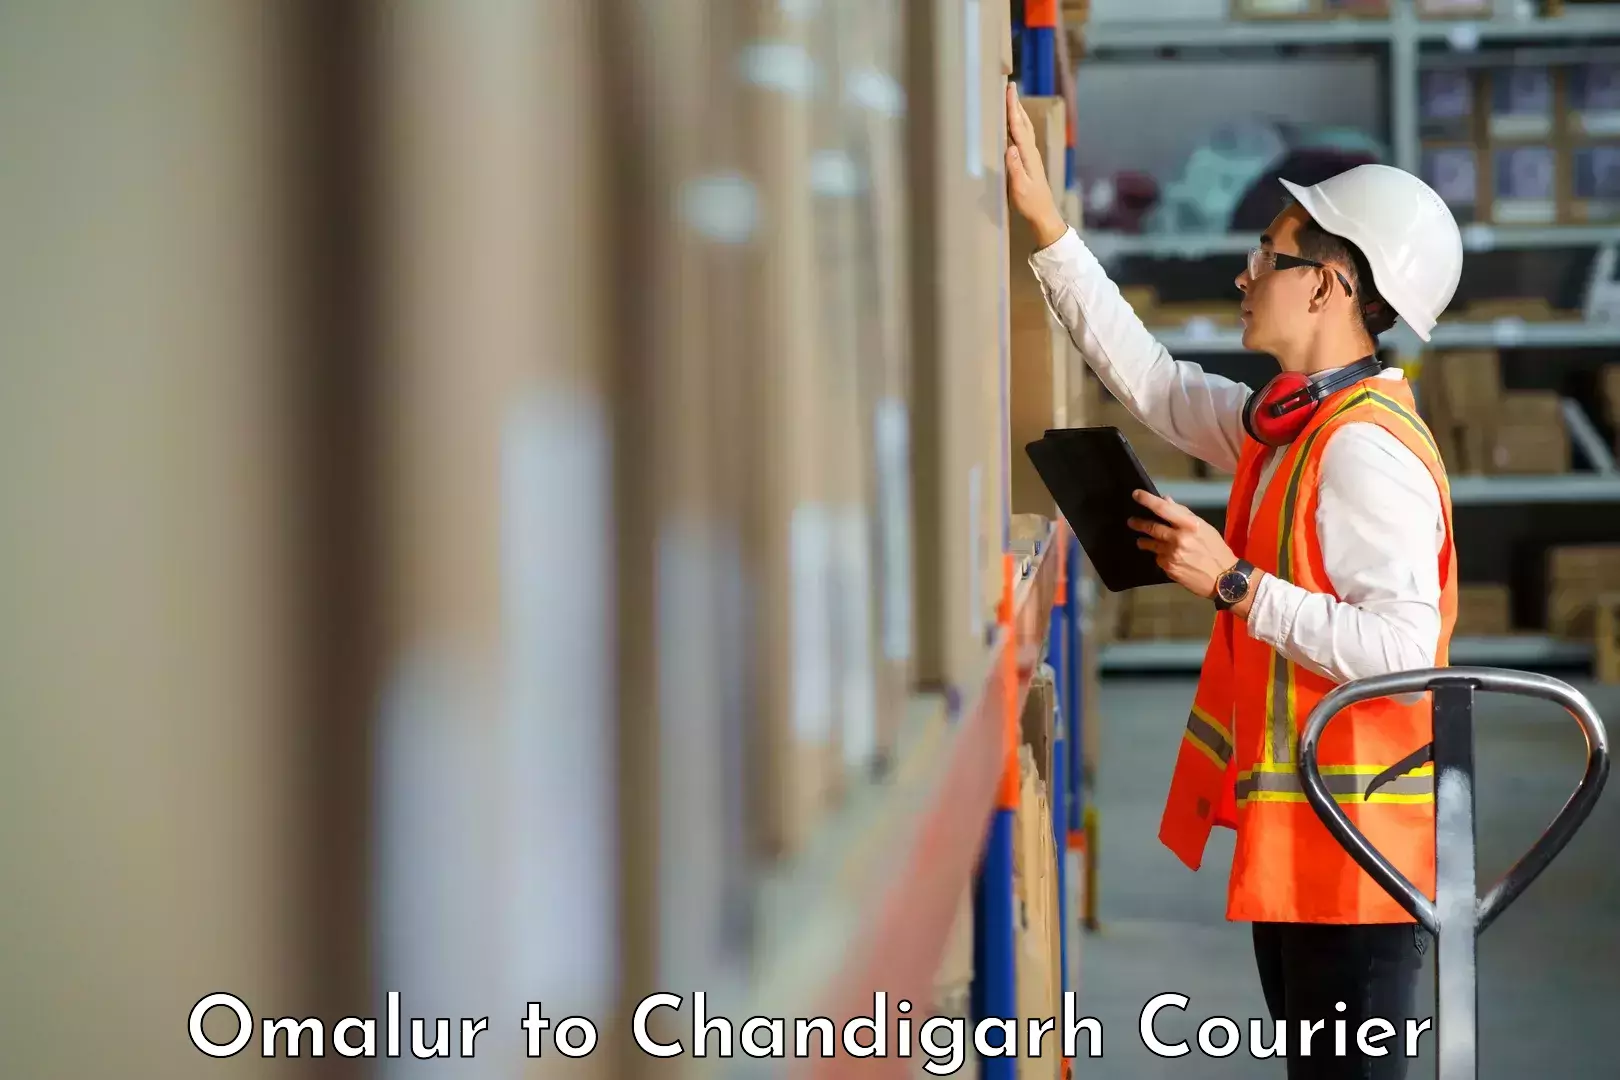 Efficient order fulfillment Omalur to Chandigarh